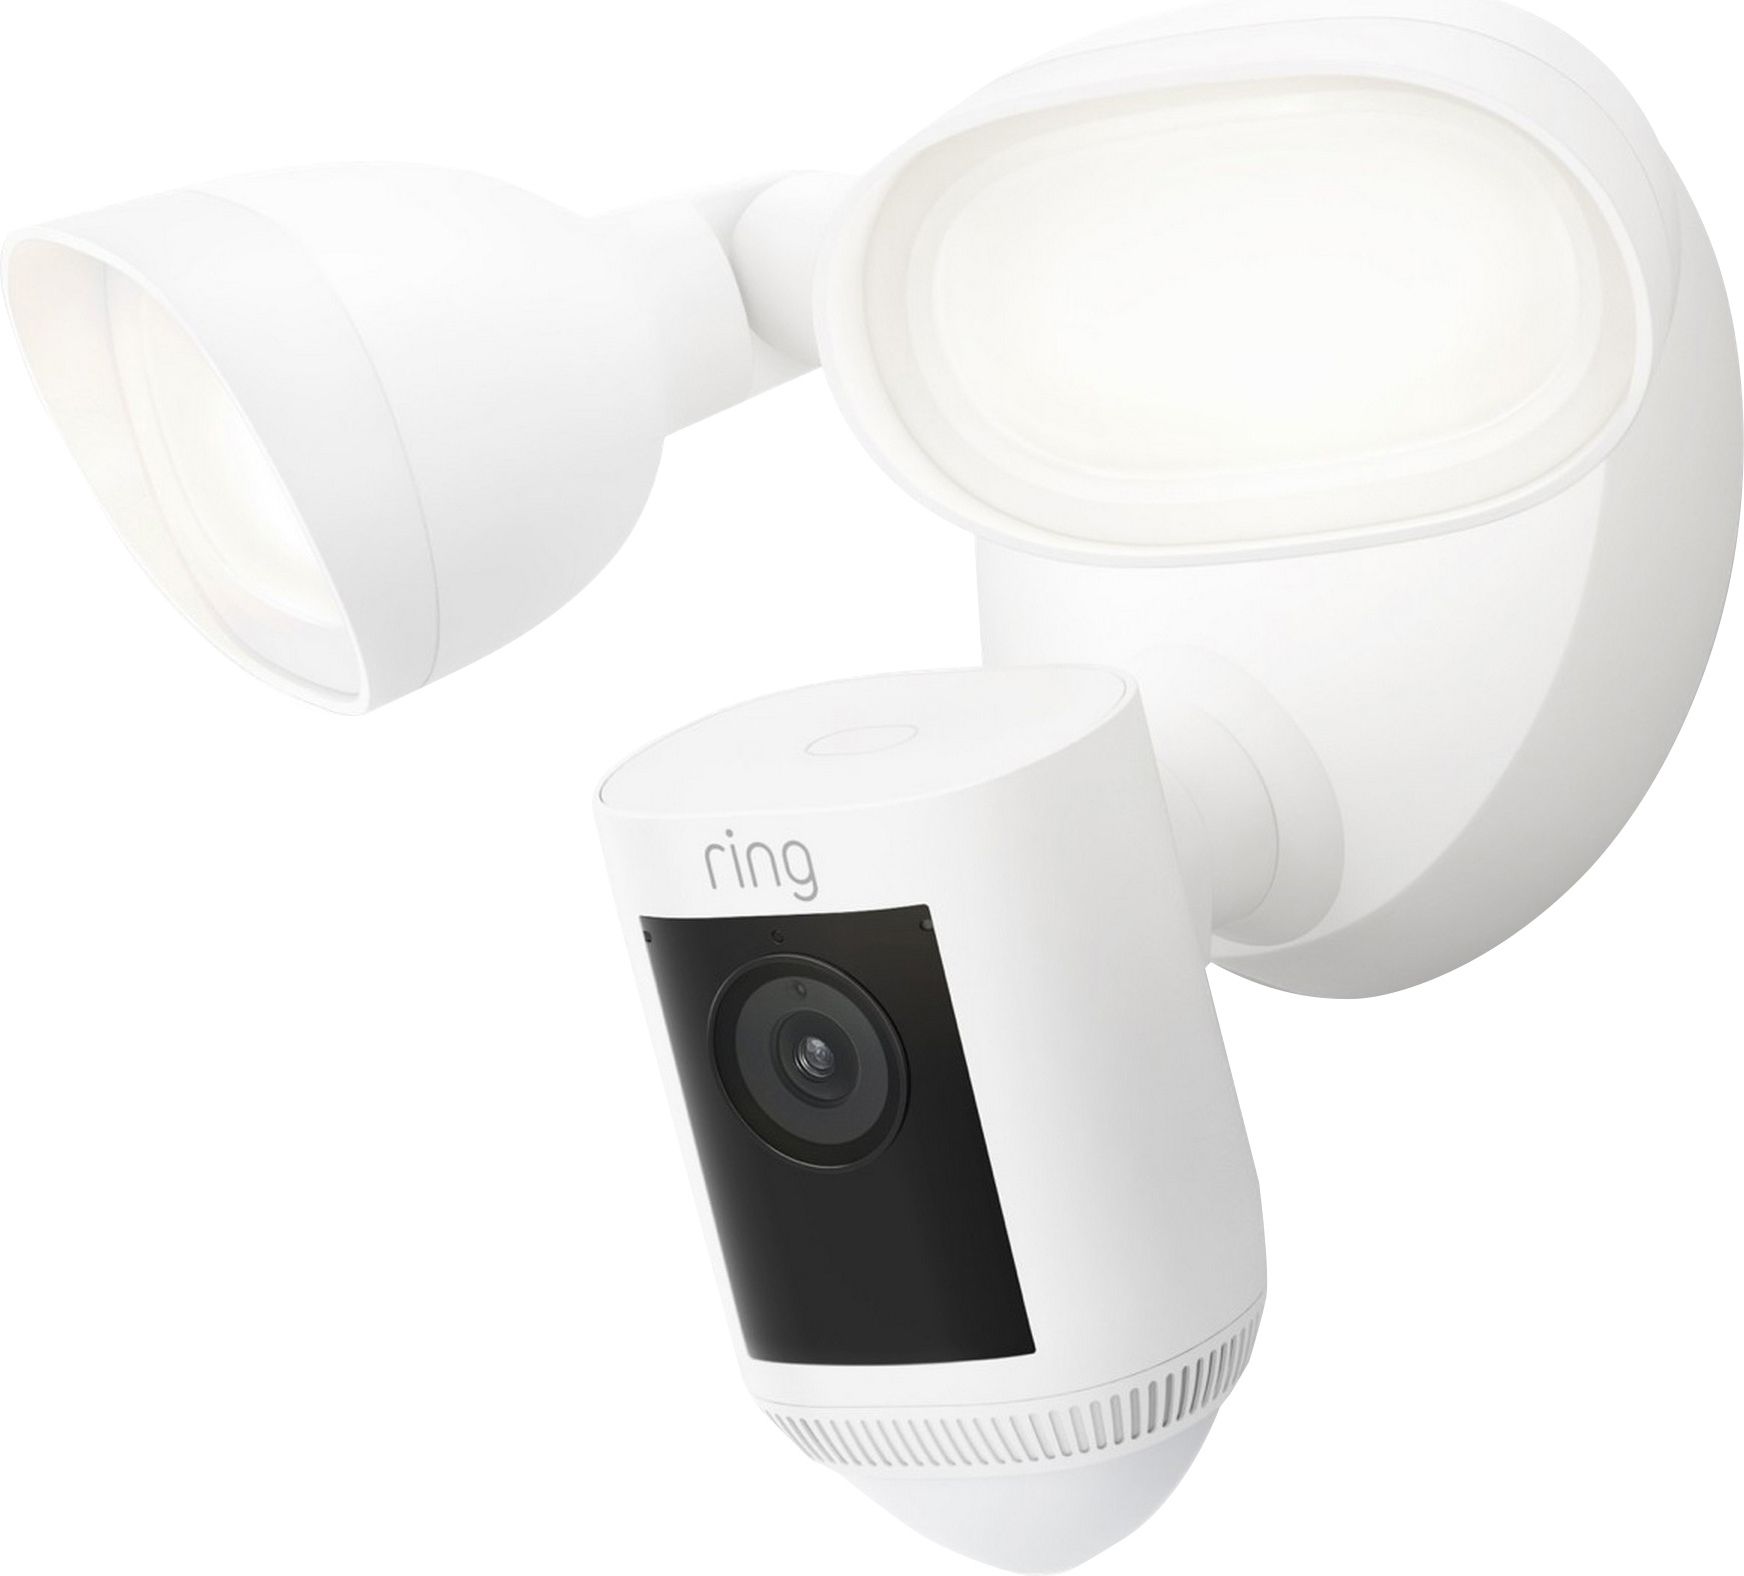 Ring Floodlight Cam Wired Pro Full HD 1080p Smart Home Security Camera - White, White